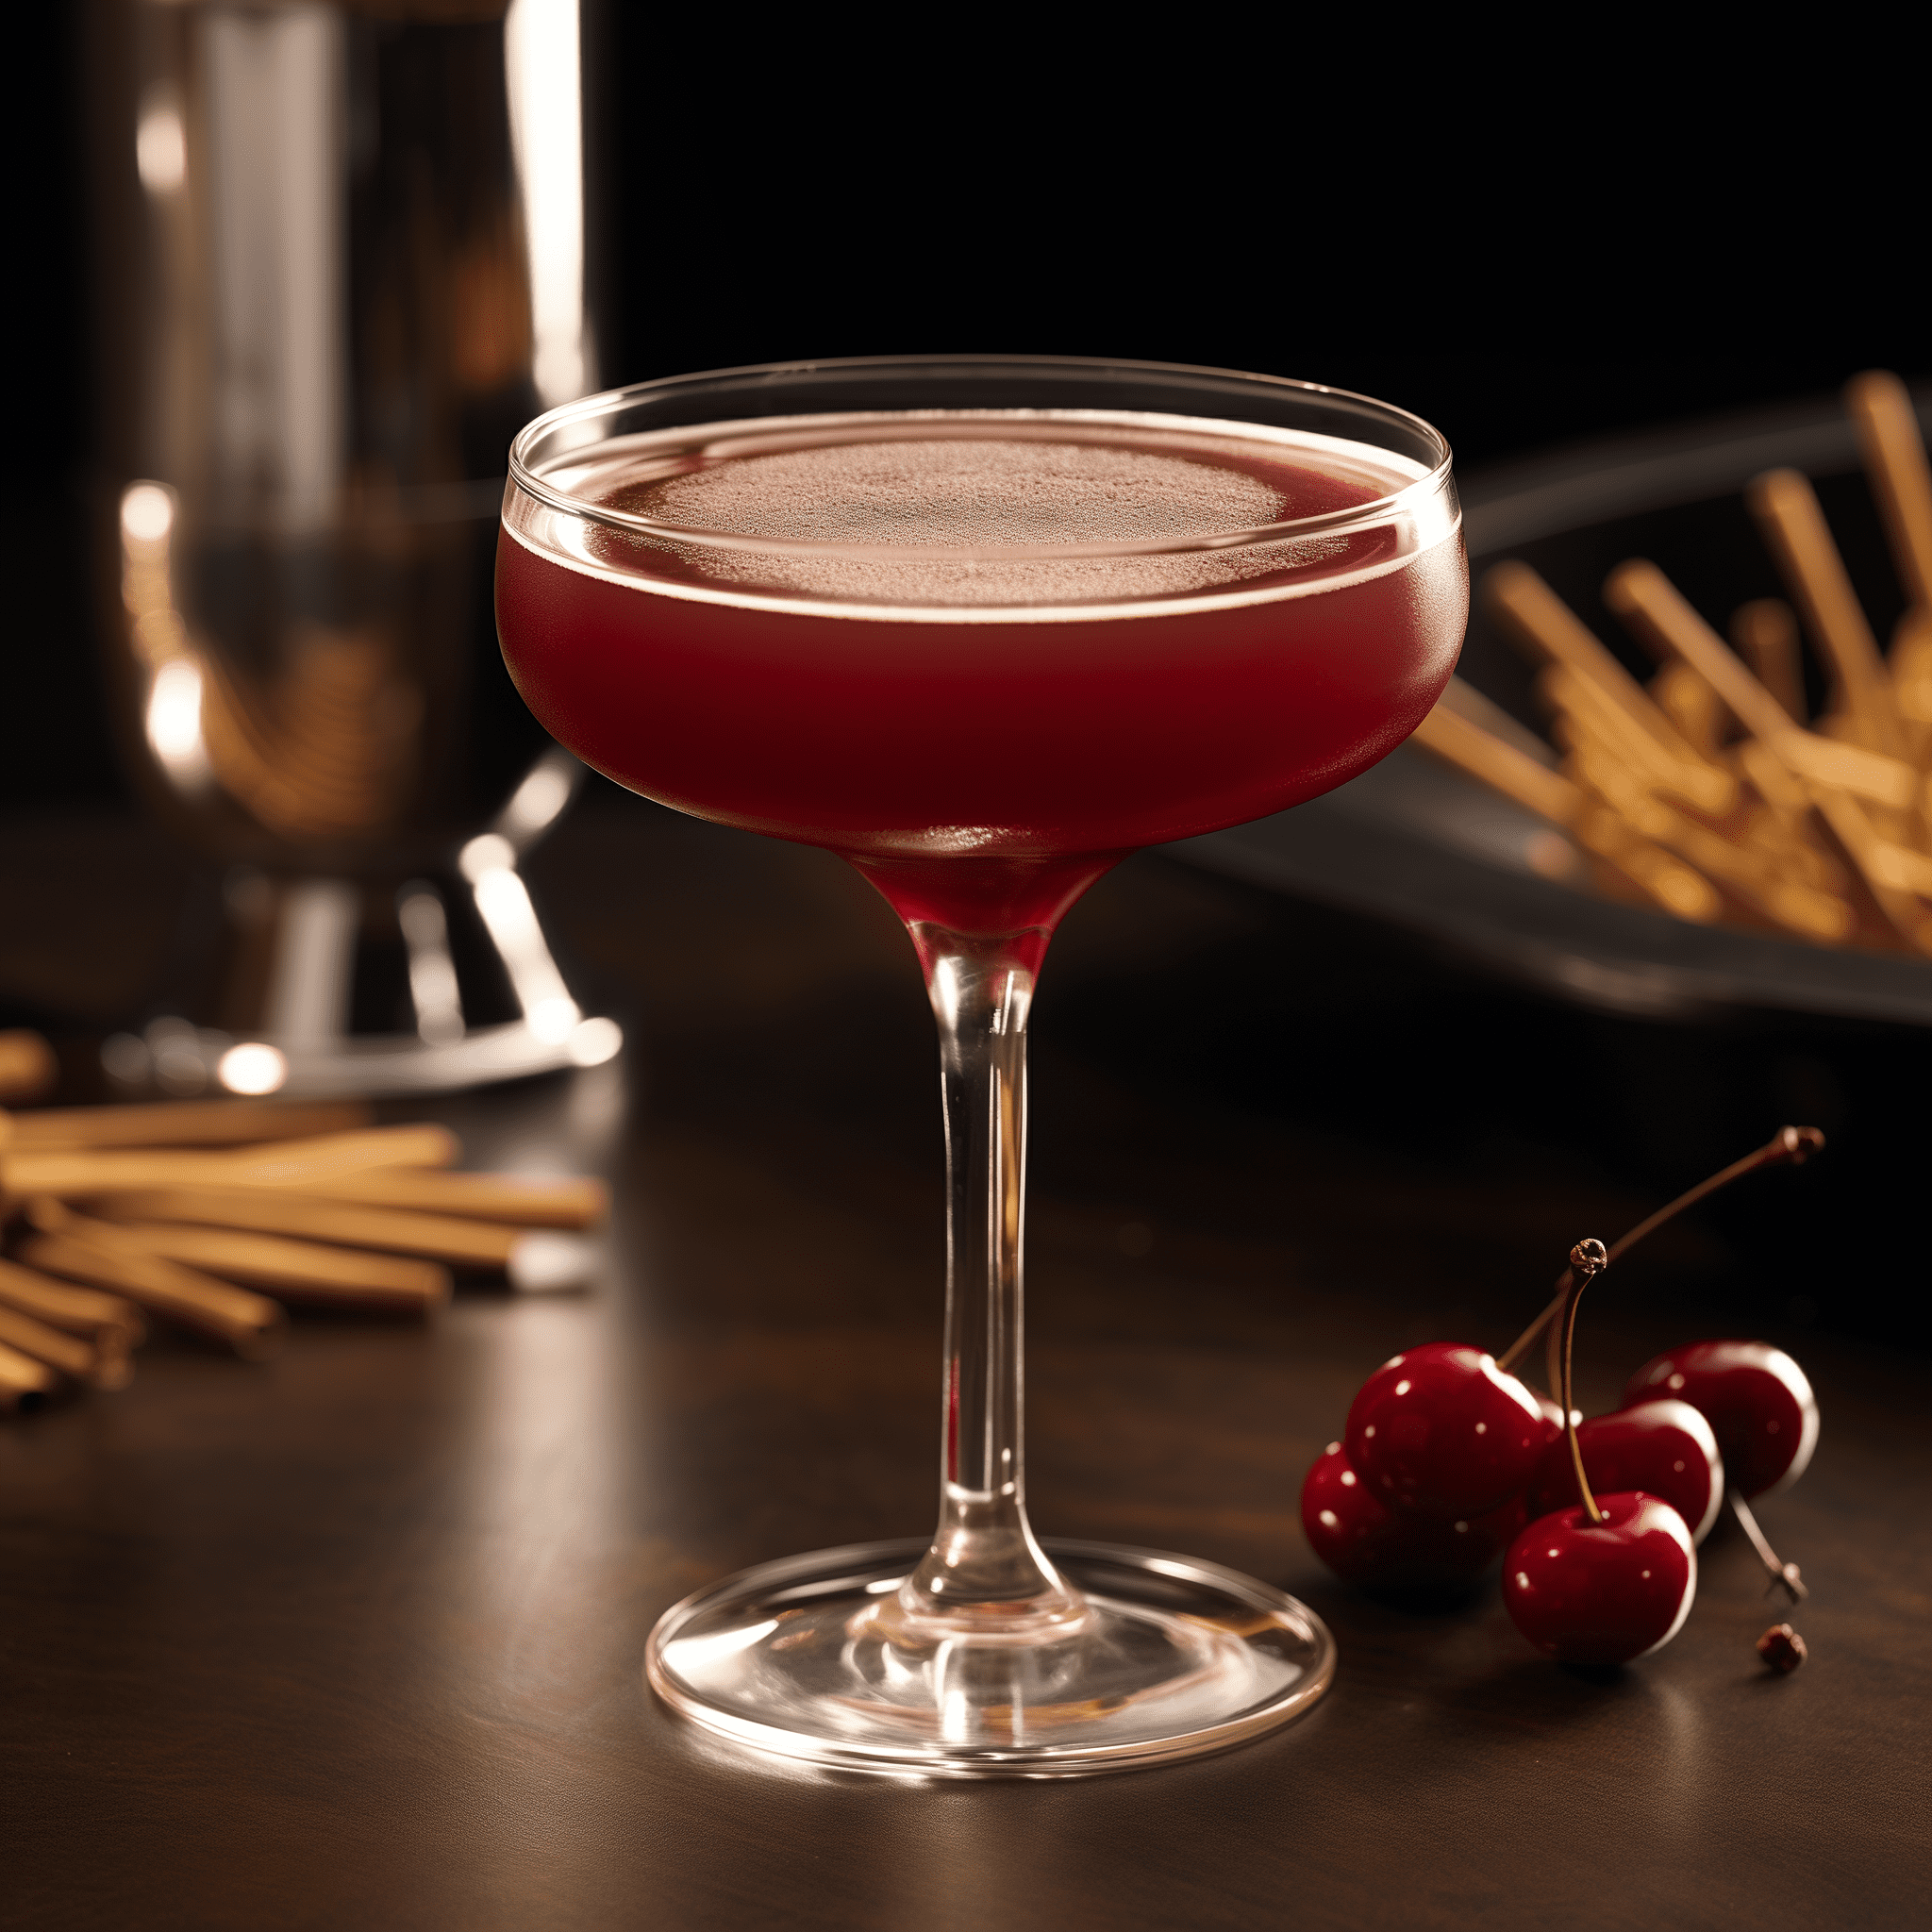 Cherry Flip Cocktail Recipe - The Cherry Flip offers a creamy, velvety texture with a sweet and slightly tart cherry flavor. The nutmeg adds a warm, spicy undertone, making the drink rich and complex.